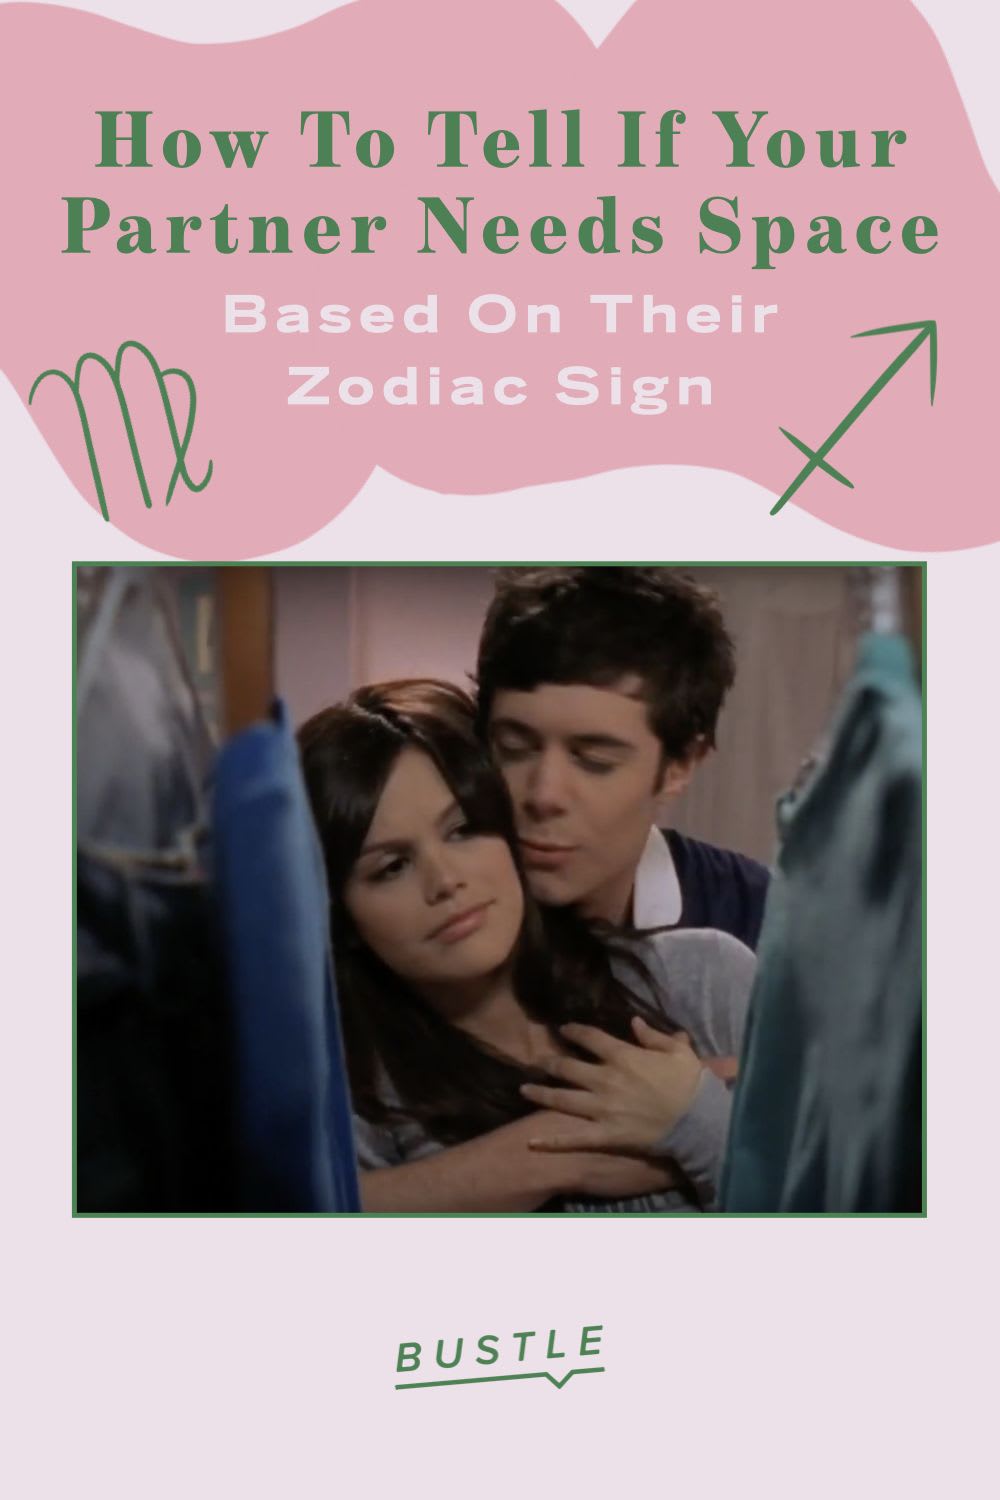 How To Tell If Your Partner Needs Space, Based On Their Zodiac Sign